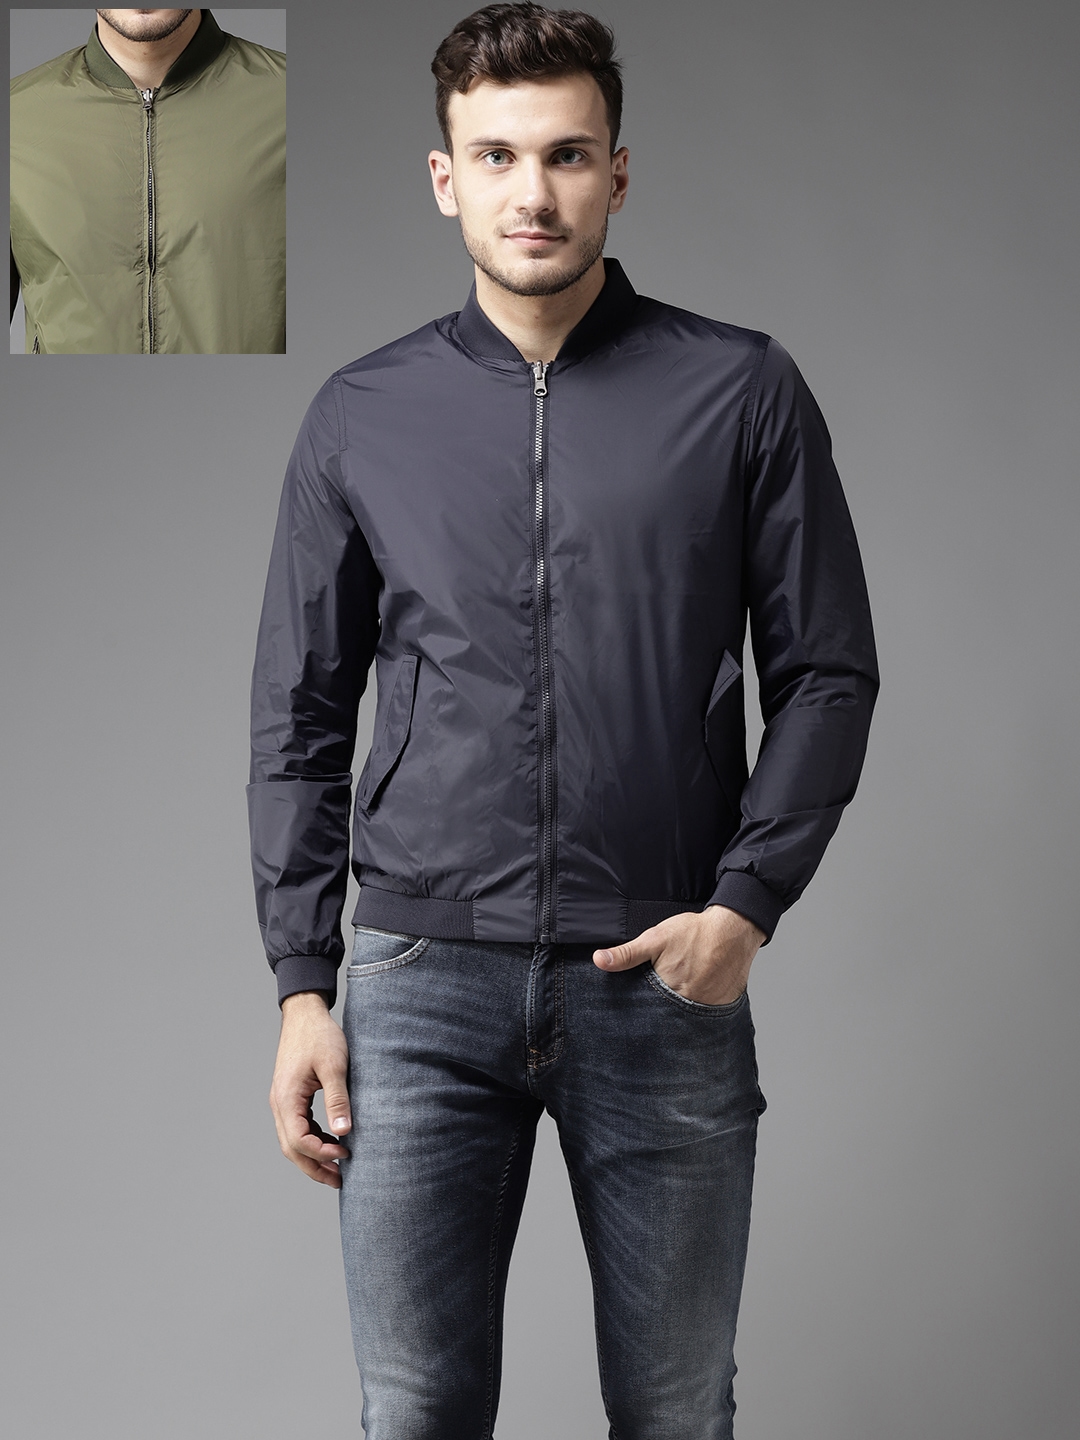 Flying Machine Jackets upto 70% off starting From Rs.749 @ Myntra-thanhphatduhoc.com.vn